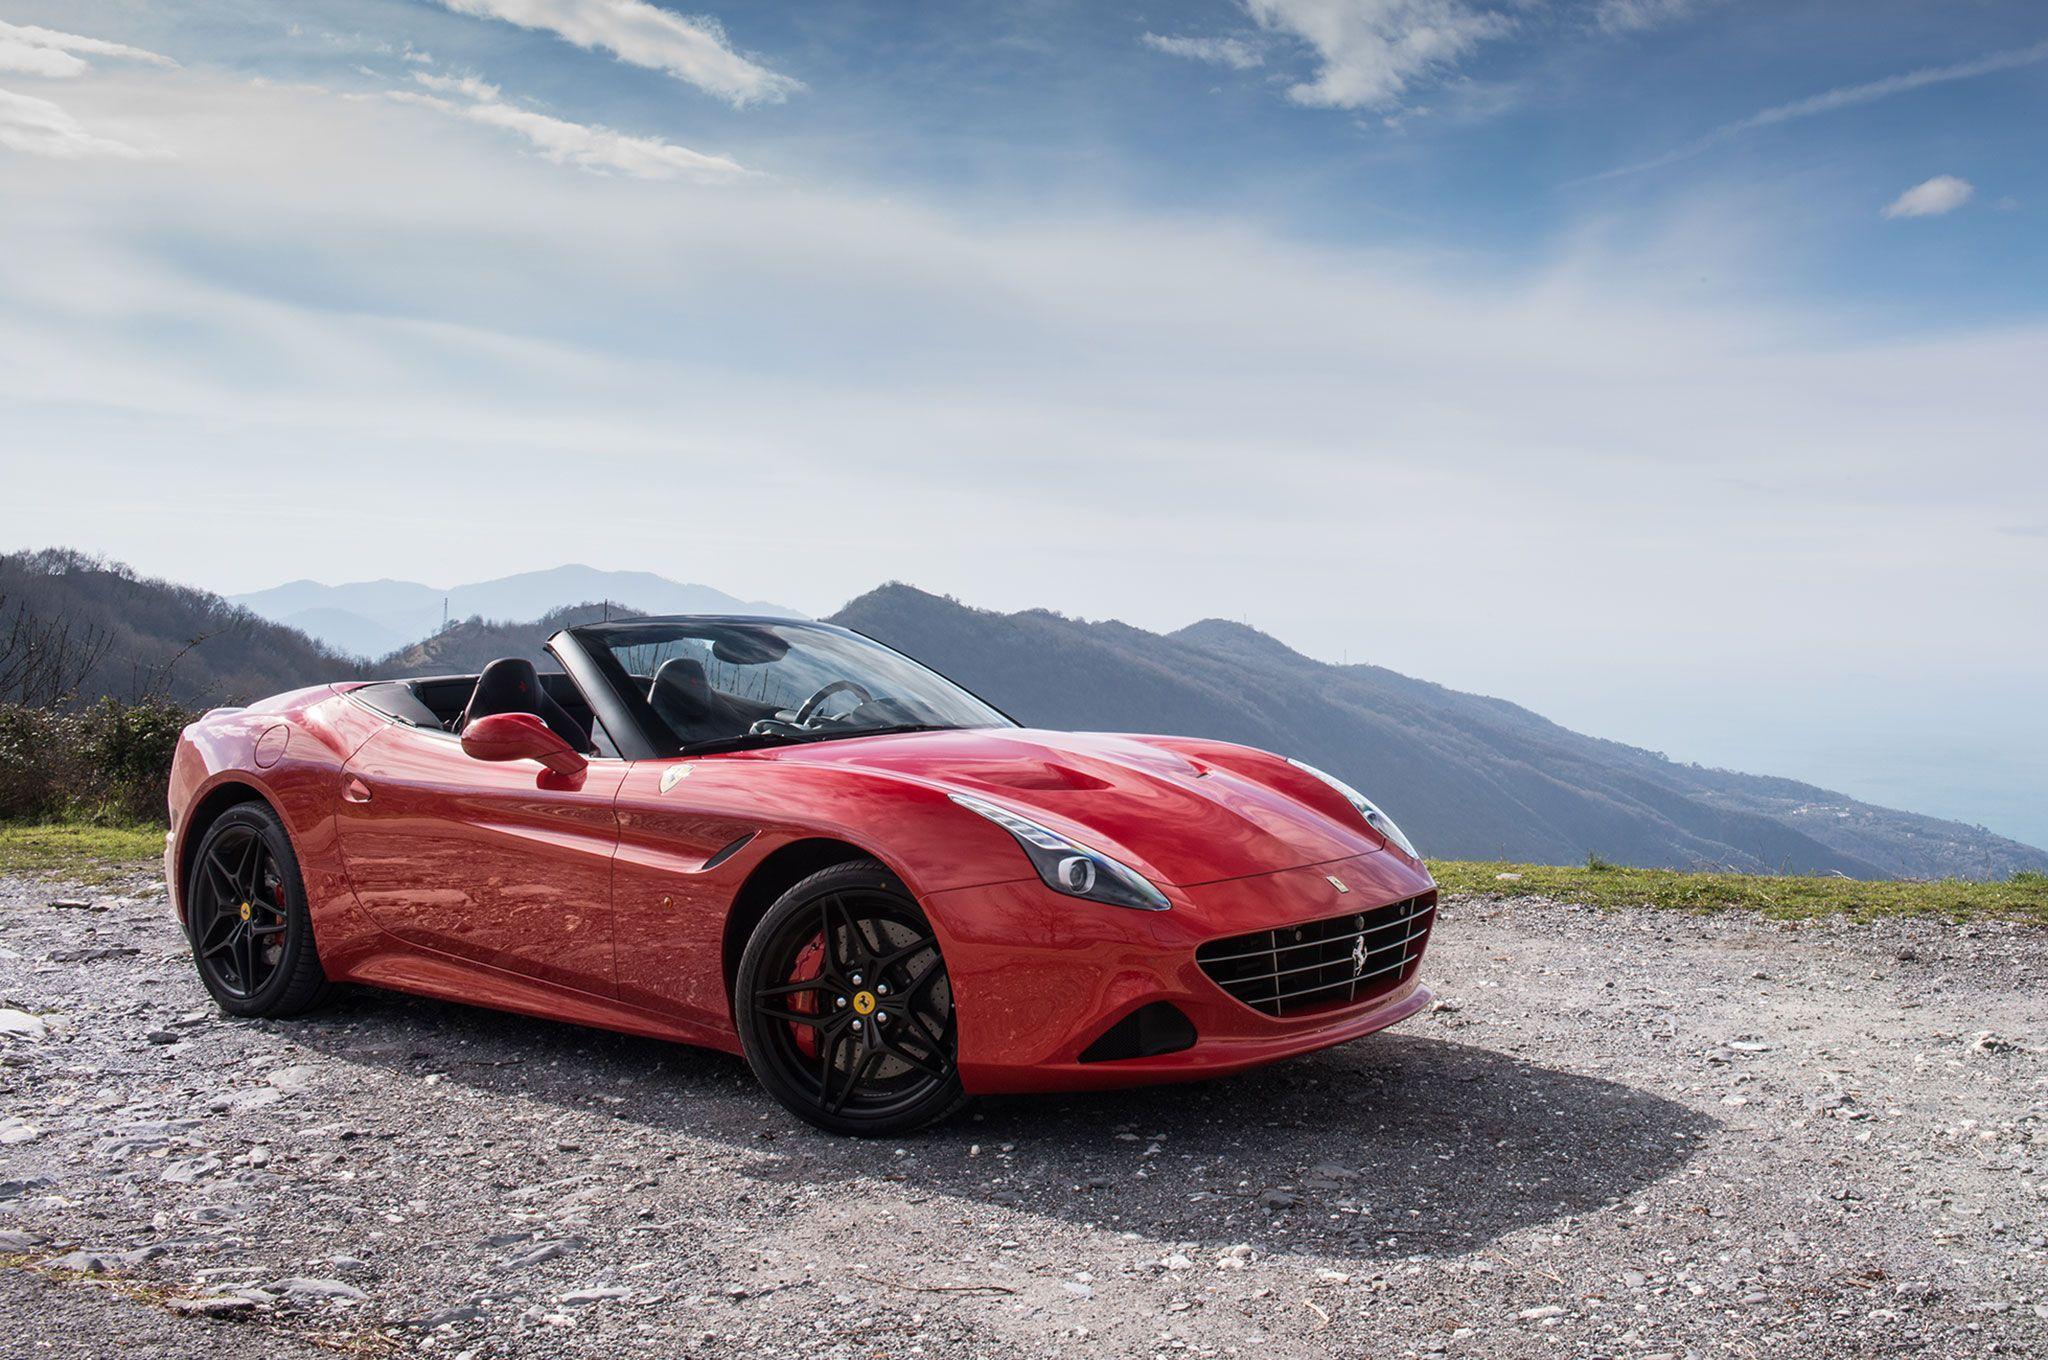 Ferrari Cars, Convertible, Coupe, Hatchback: Reviews & Prices